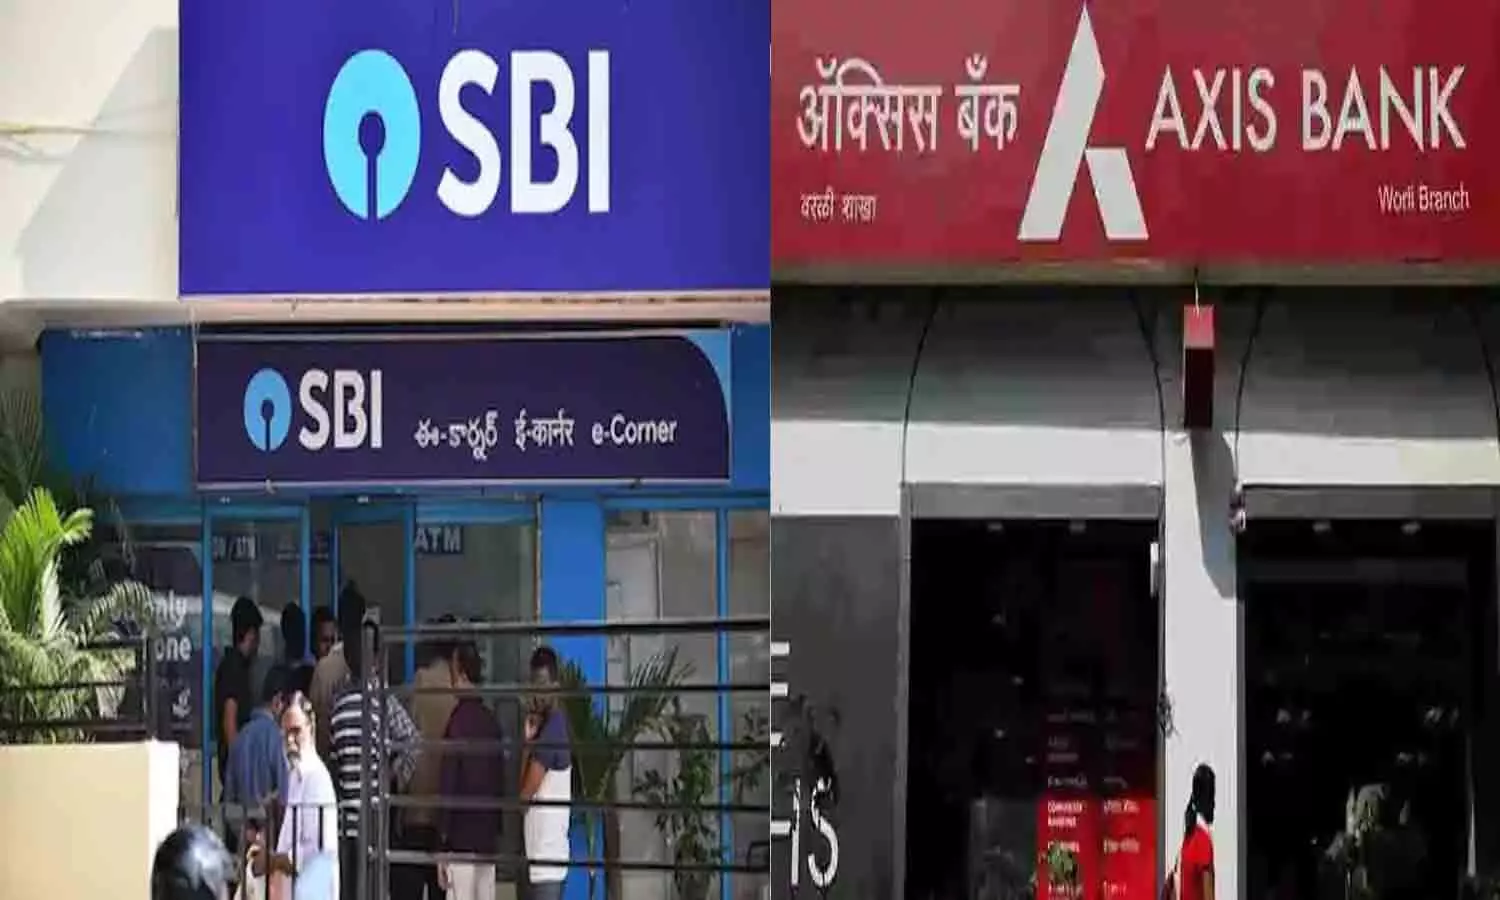 SBI and Axis Bank increSBI and Axis Bank increased interest rates, will affect the pocket of common man, know full detailsased interest rates, will affect the pocket of common man, know full details